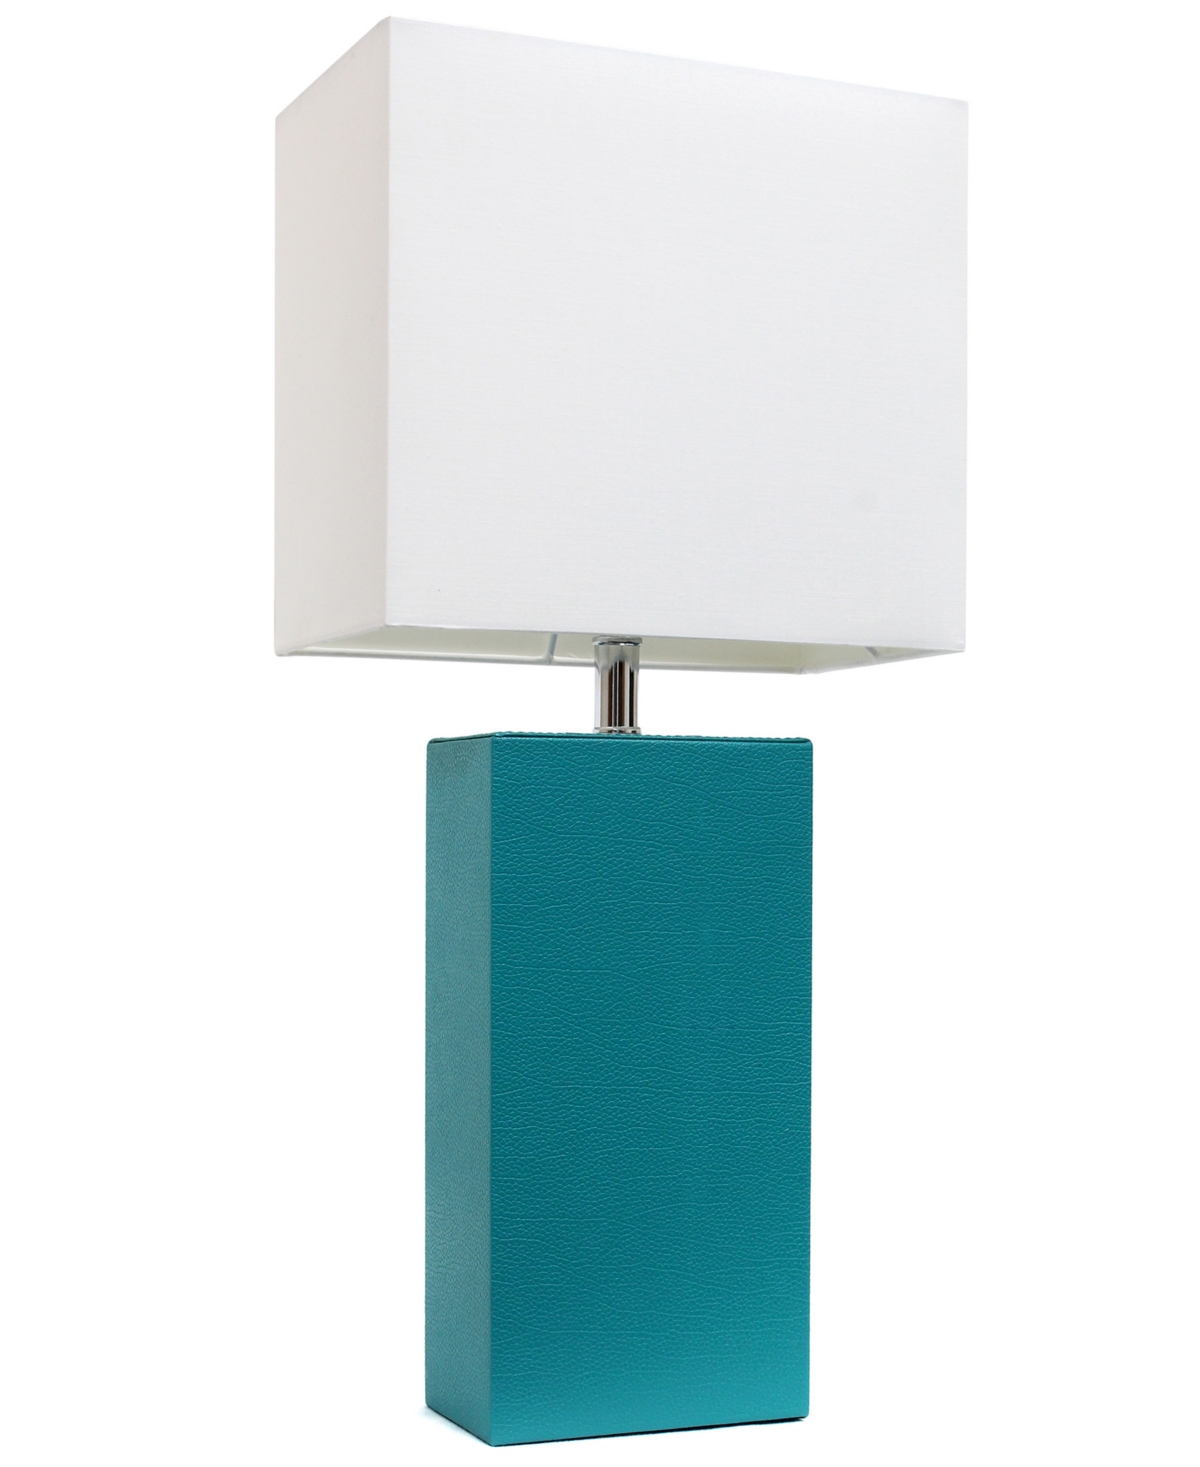 All The Rages Lalia Home Lexington 21" Leather Base Modern Home Decor Bedside Table Lamp With White Rectangular Fa In Teal